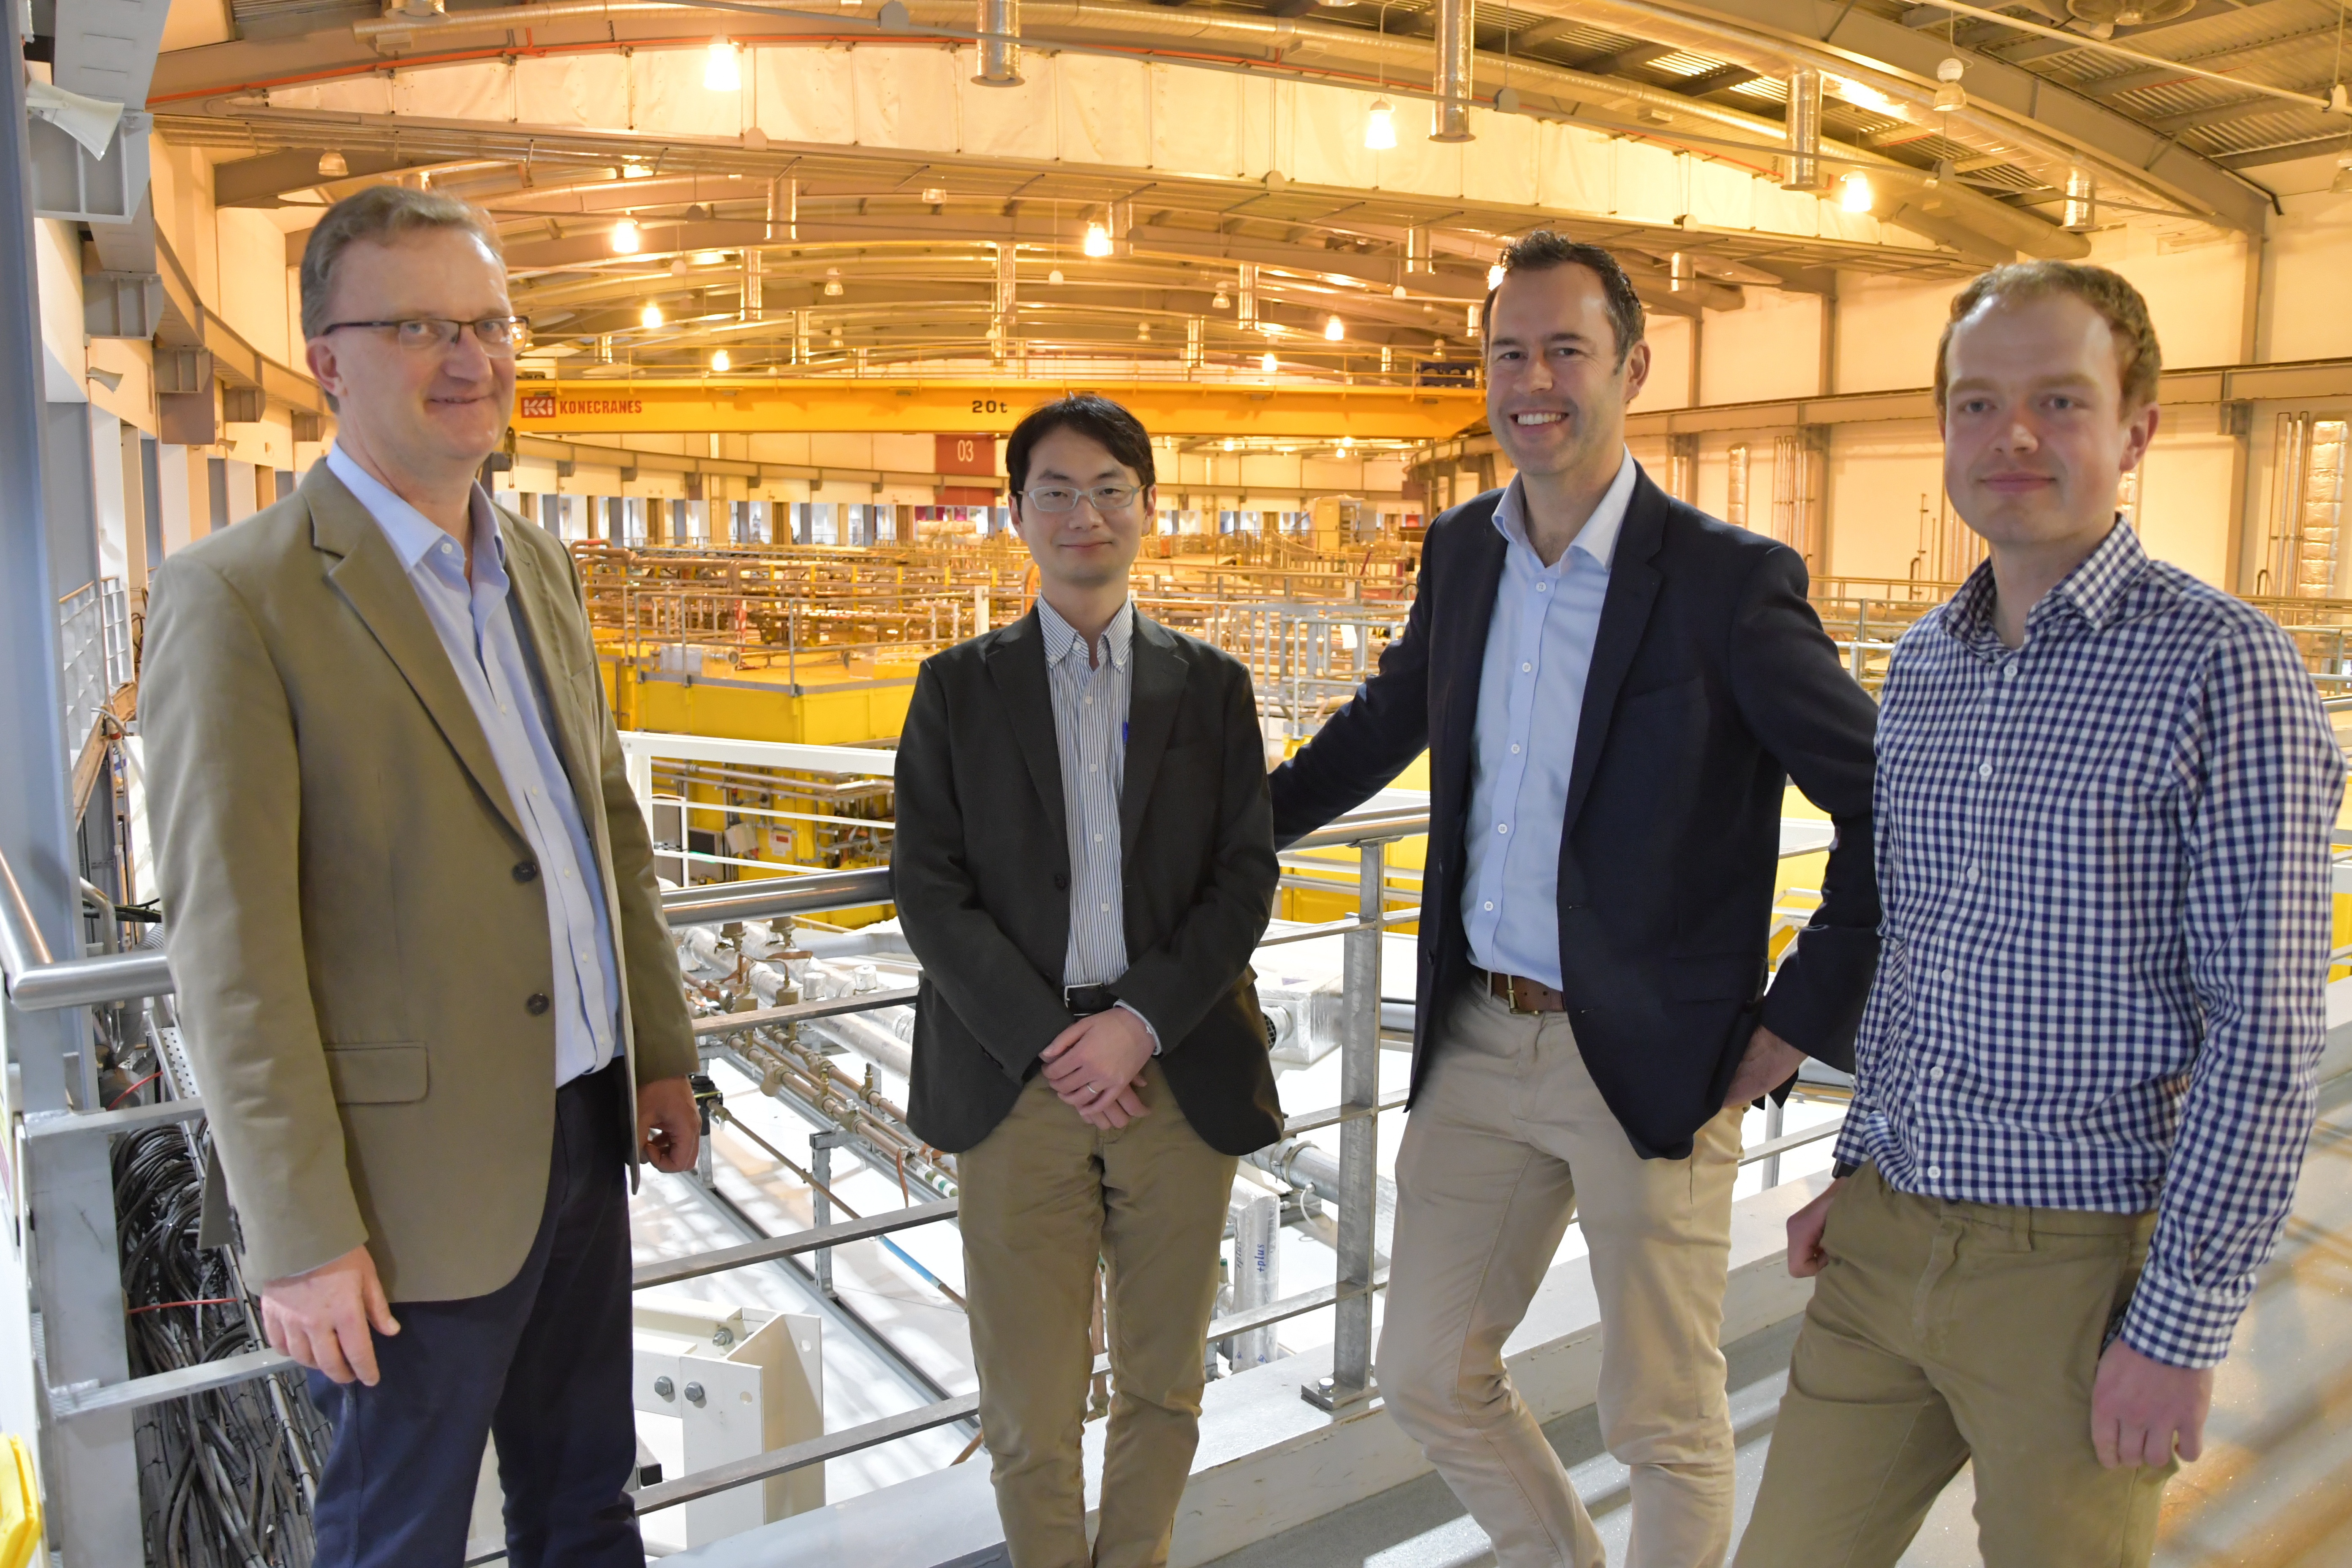 Fukushima Particles research group (L-R): Cristoph Rau (I13), Yukihiko Satou, (researcher from the Collaborative Laboratories for Advanced Decommissioning Science, Japan Atomic Energy Agency), with Tom Scott and Peter Martin (University of Bristol).